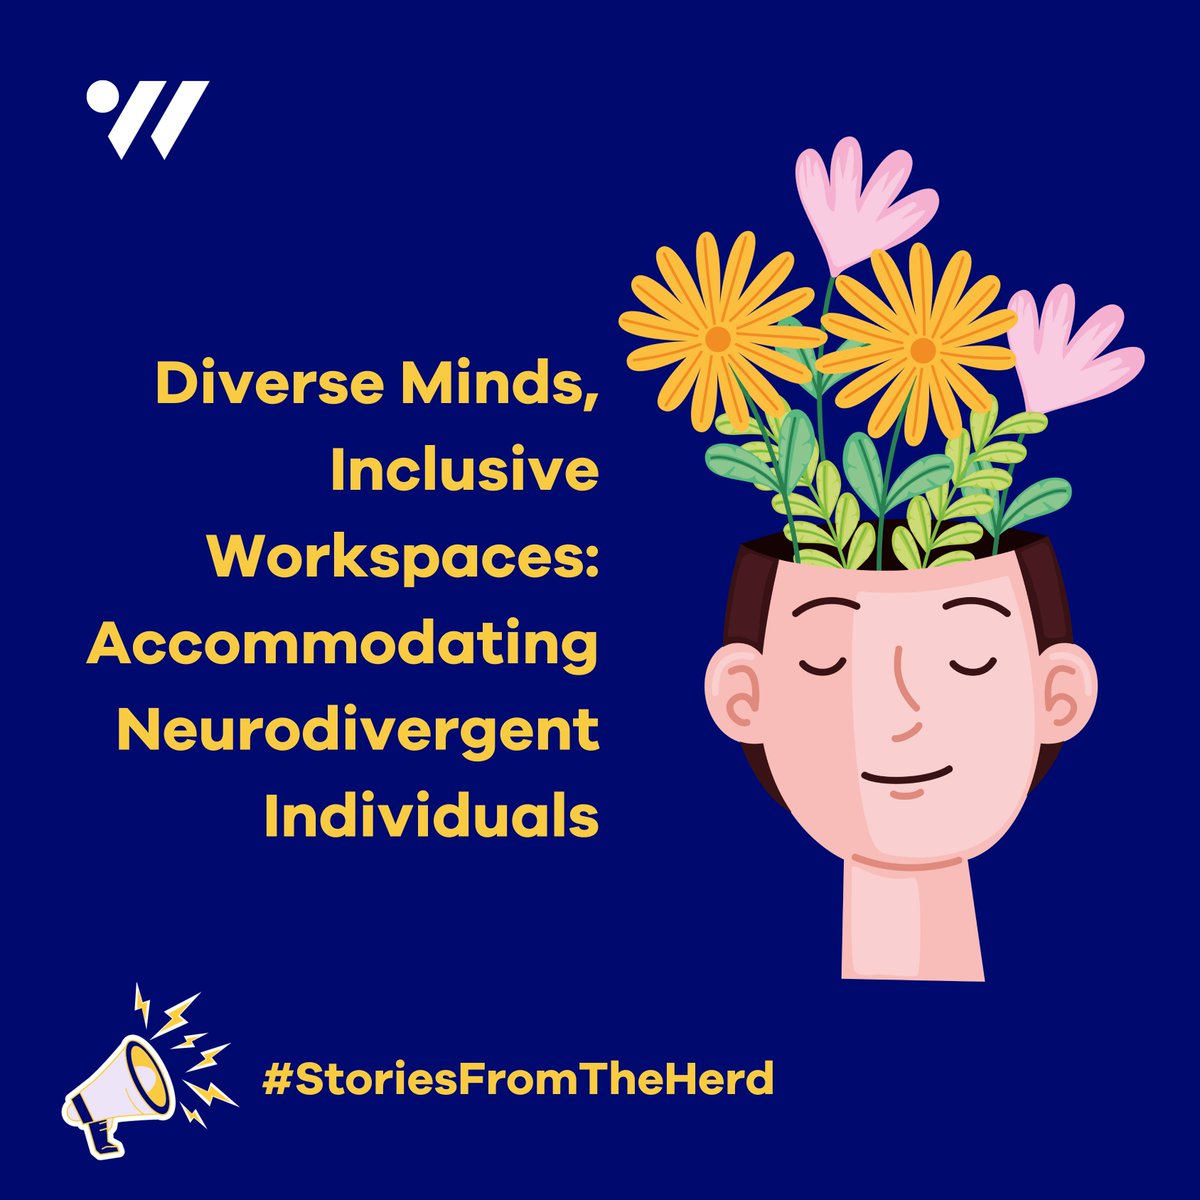 This week is Neurodiversity Celebration Week! In this edition of #StoriesFromTheHerd Stacy Reed, Sr. Technical Writer at Wavelo shares her insights on accommodating neurodiversity in the workplace. Click the link in bio to read the full blog! #NeurodiversityCelebrationWeek